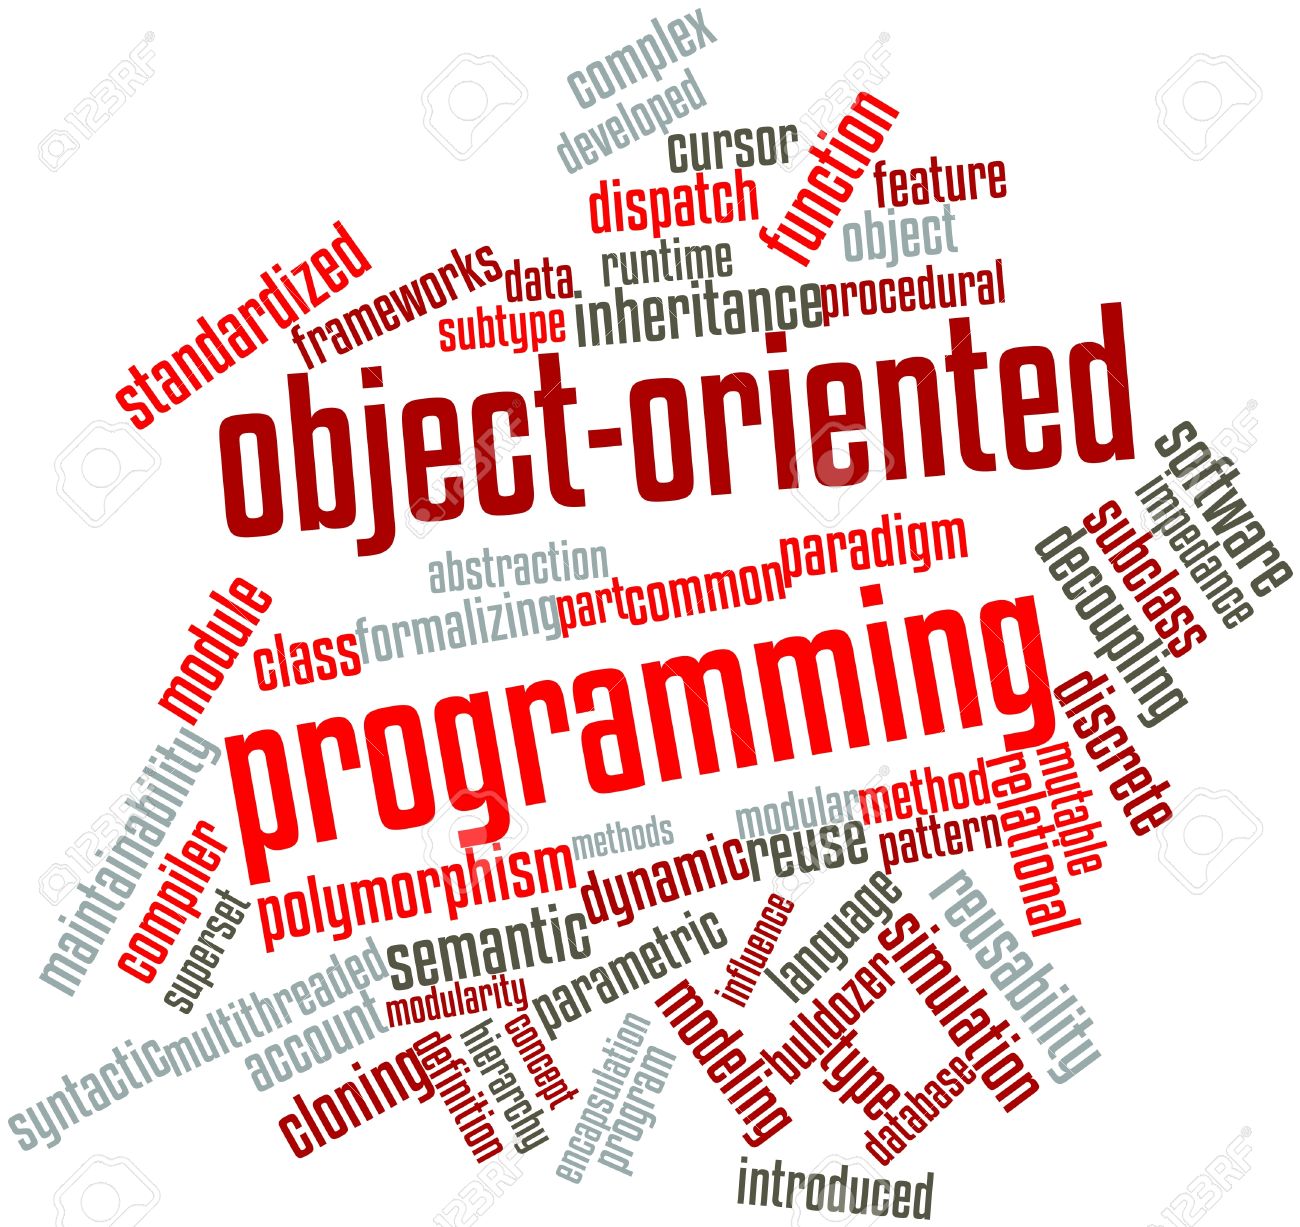 Object-oriented programming